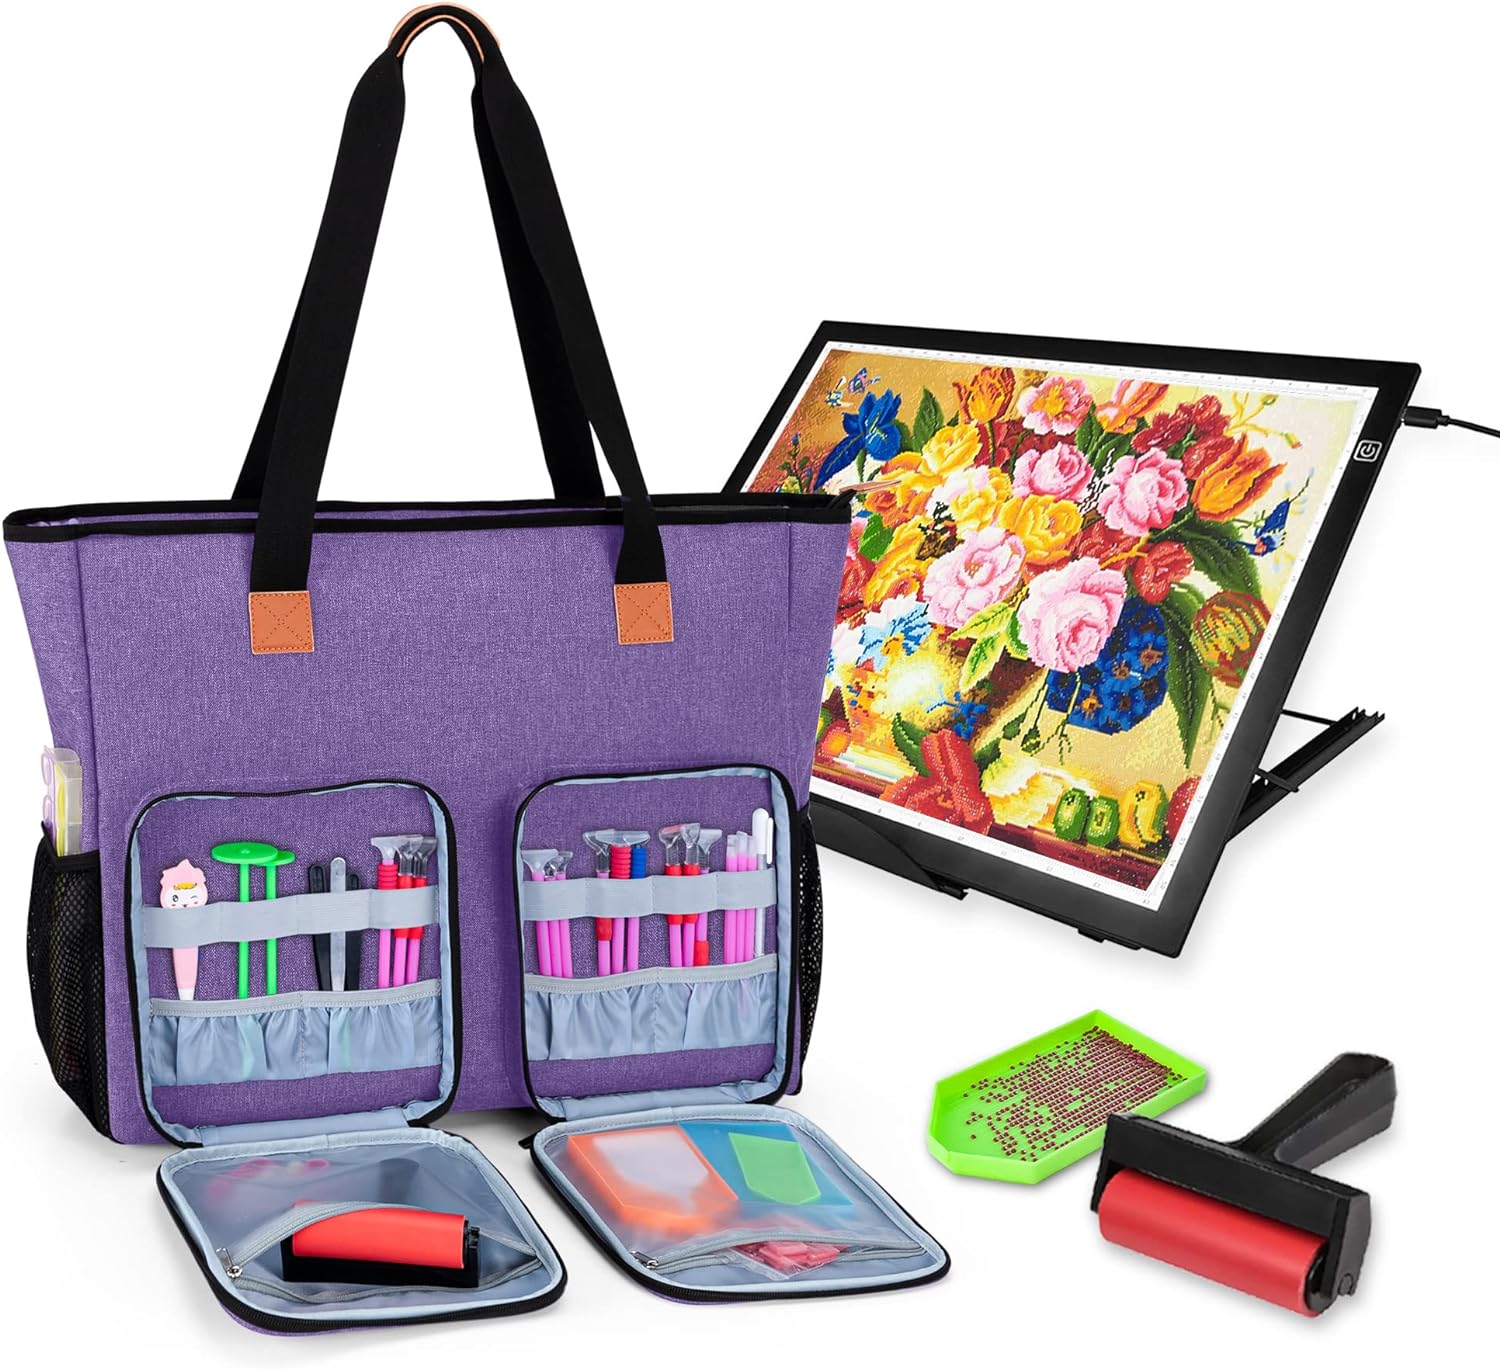 LUXJA Carrying Case for Diamond Painting Accessories and A3 Light Pad, Diamond Painting Bag for A3 and B3 Light Box (Bag Only), Purple